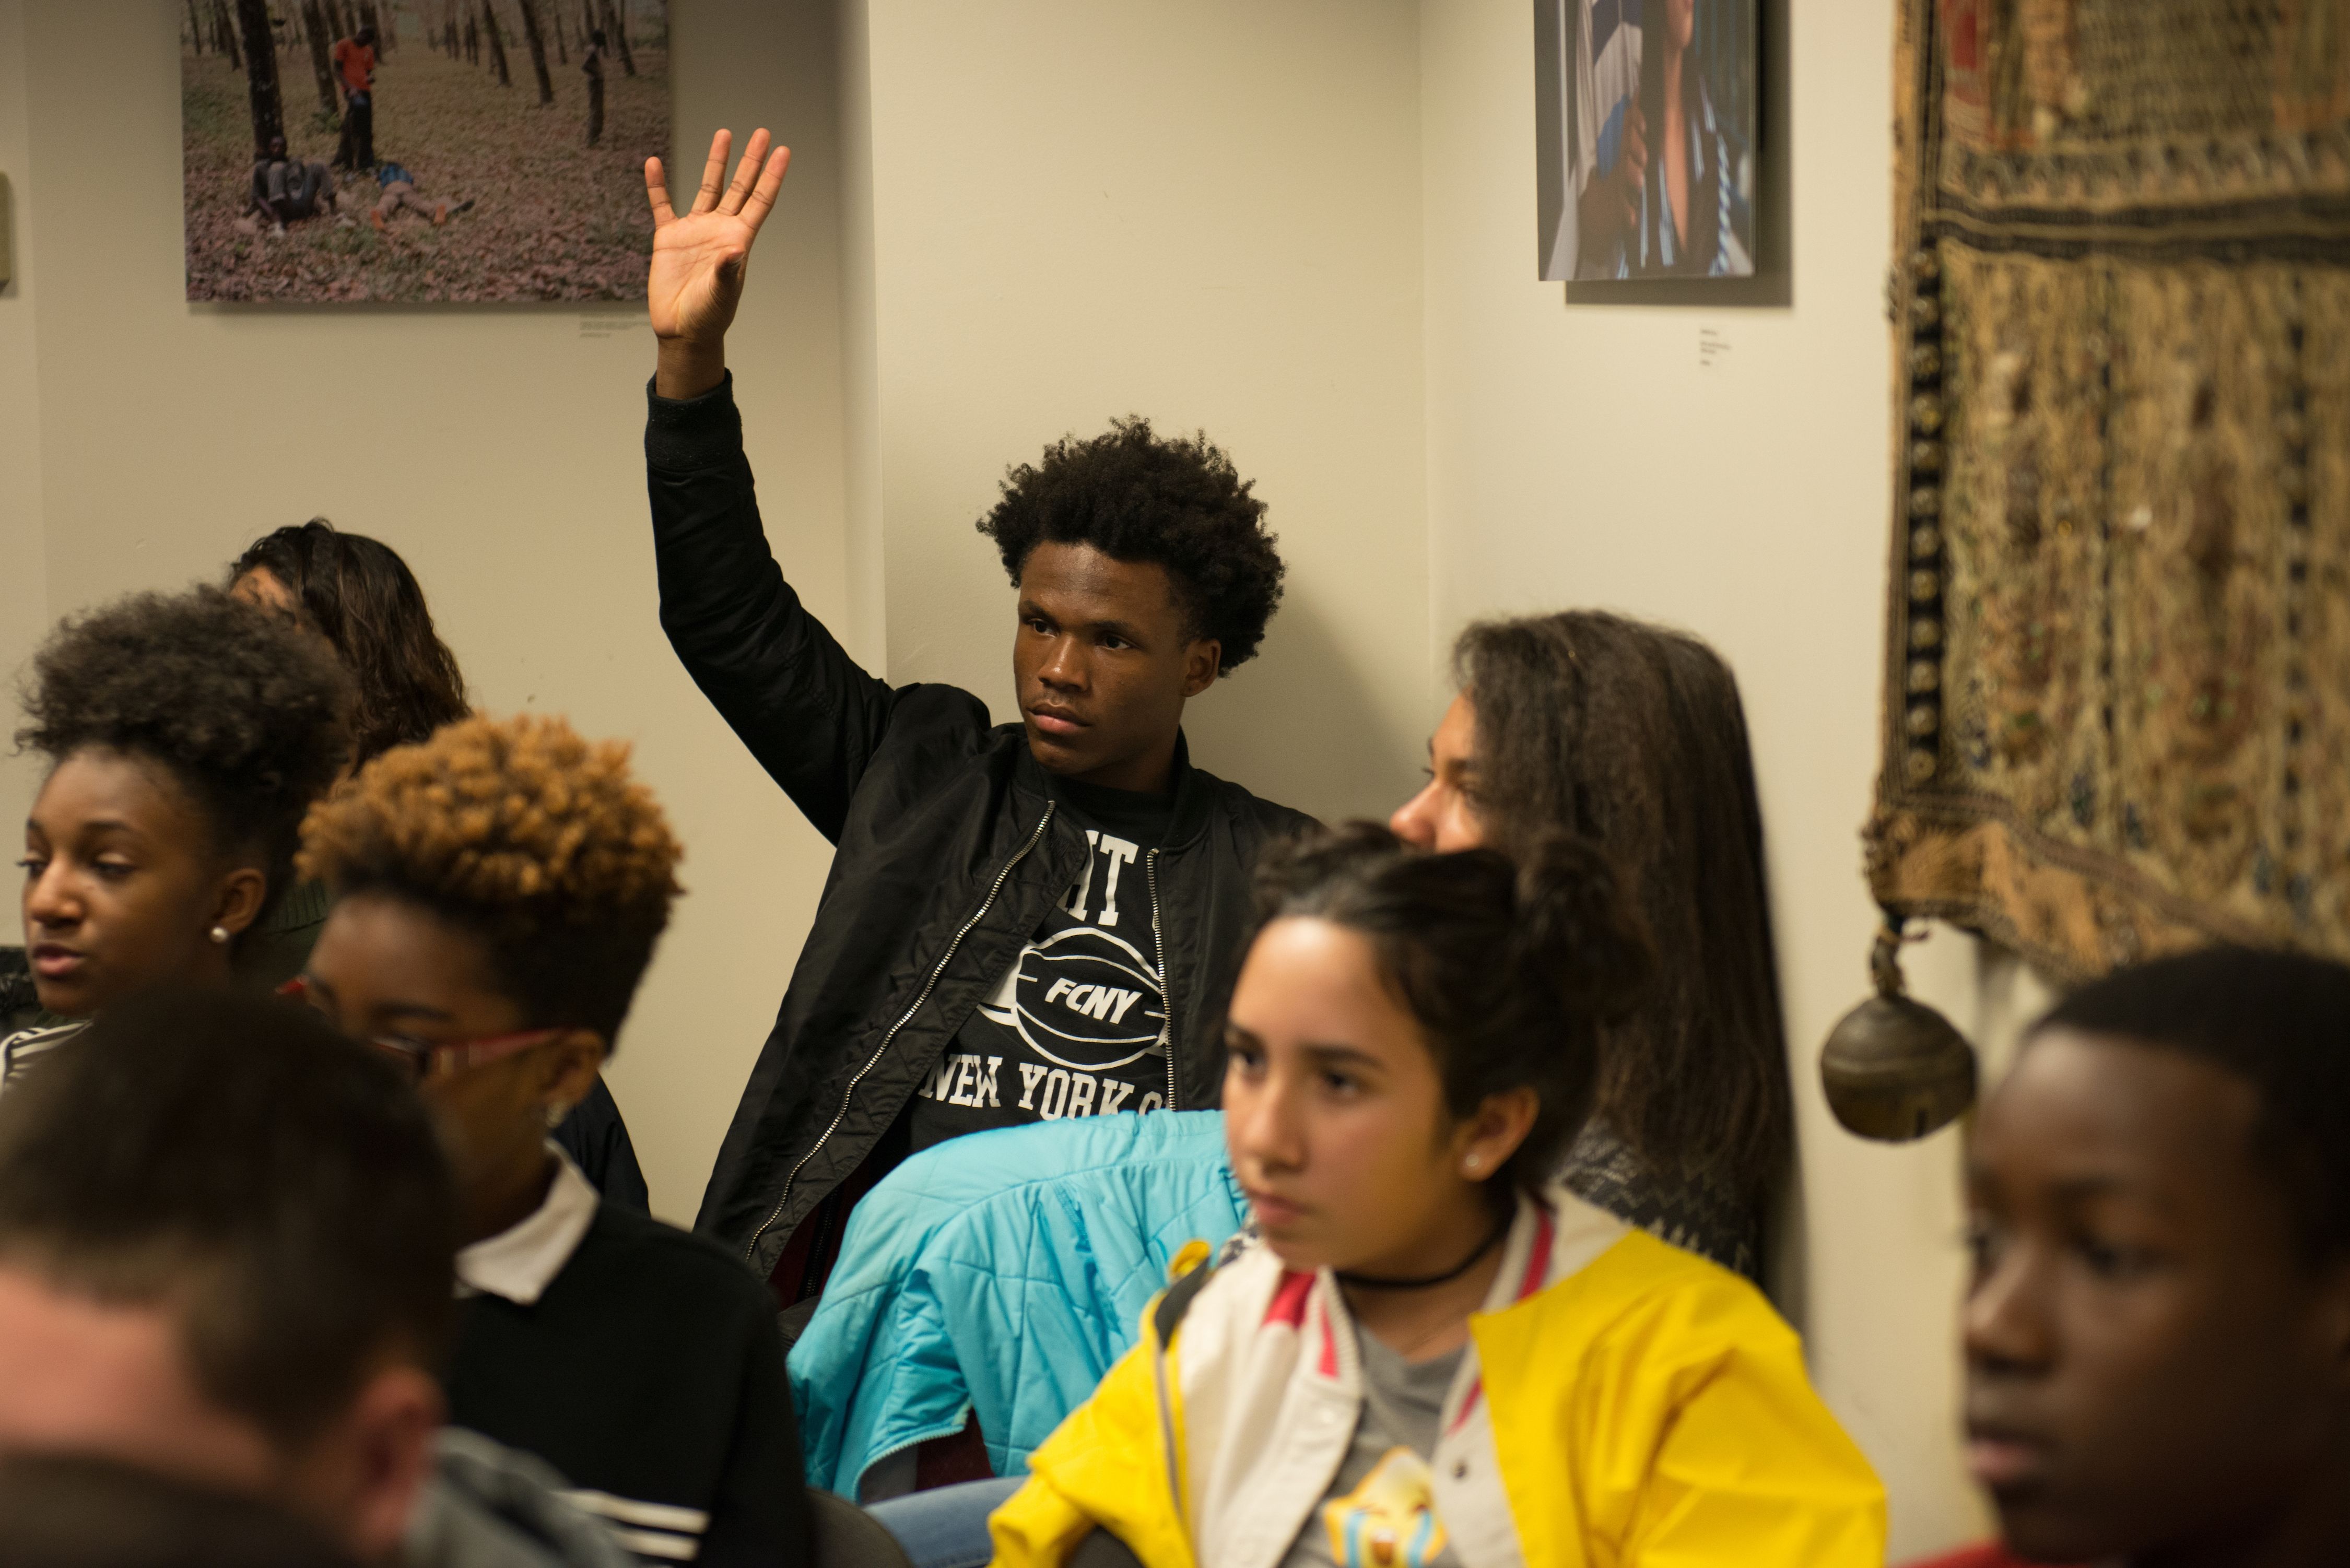 Hardy Middle School students share their interpretations of photographs by grantee Allison Shelley during day two of the "Walk Like a Journalist" workshop at the Pulitzer Center offices. Image by Jordan Roth. Washington, D.C., 2017. 